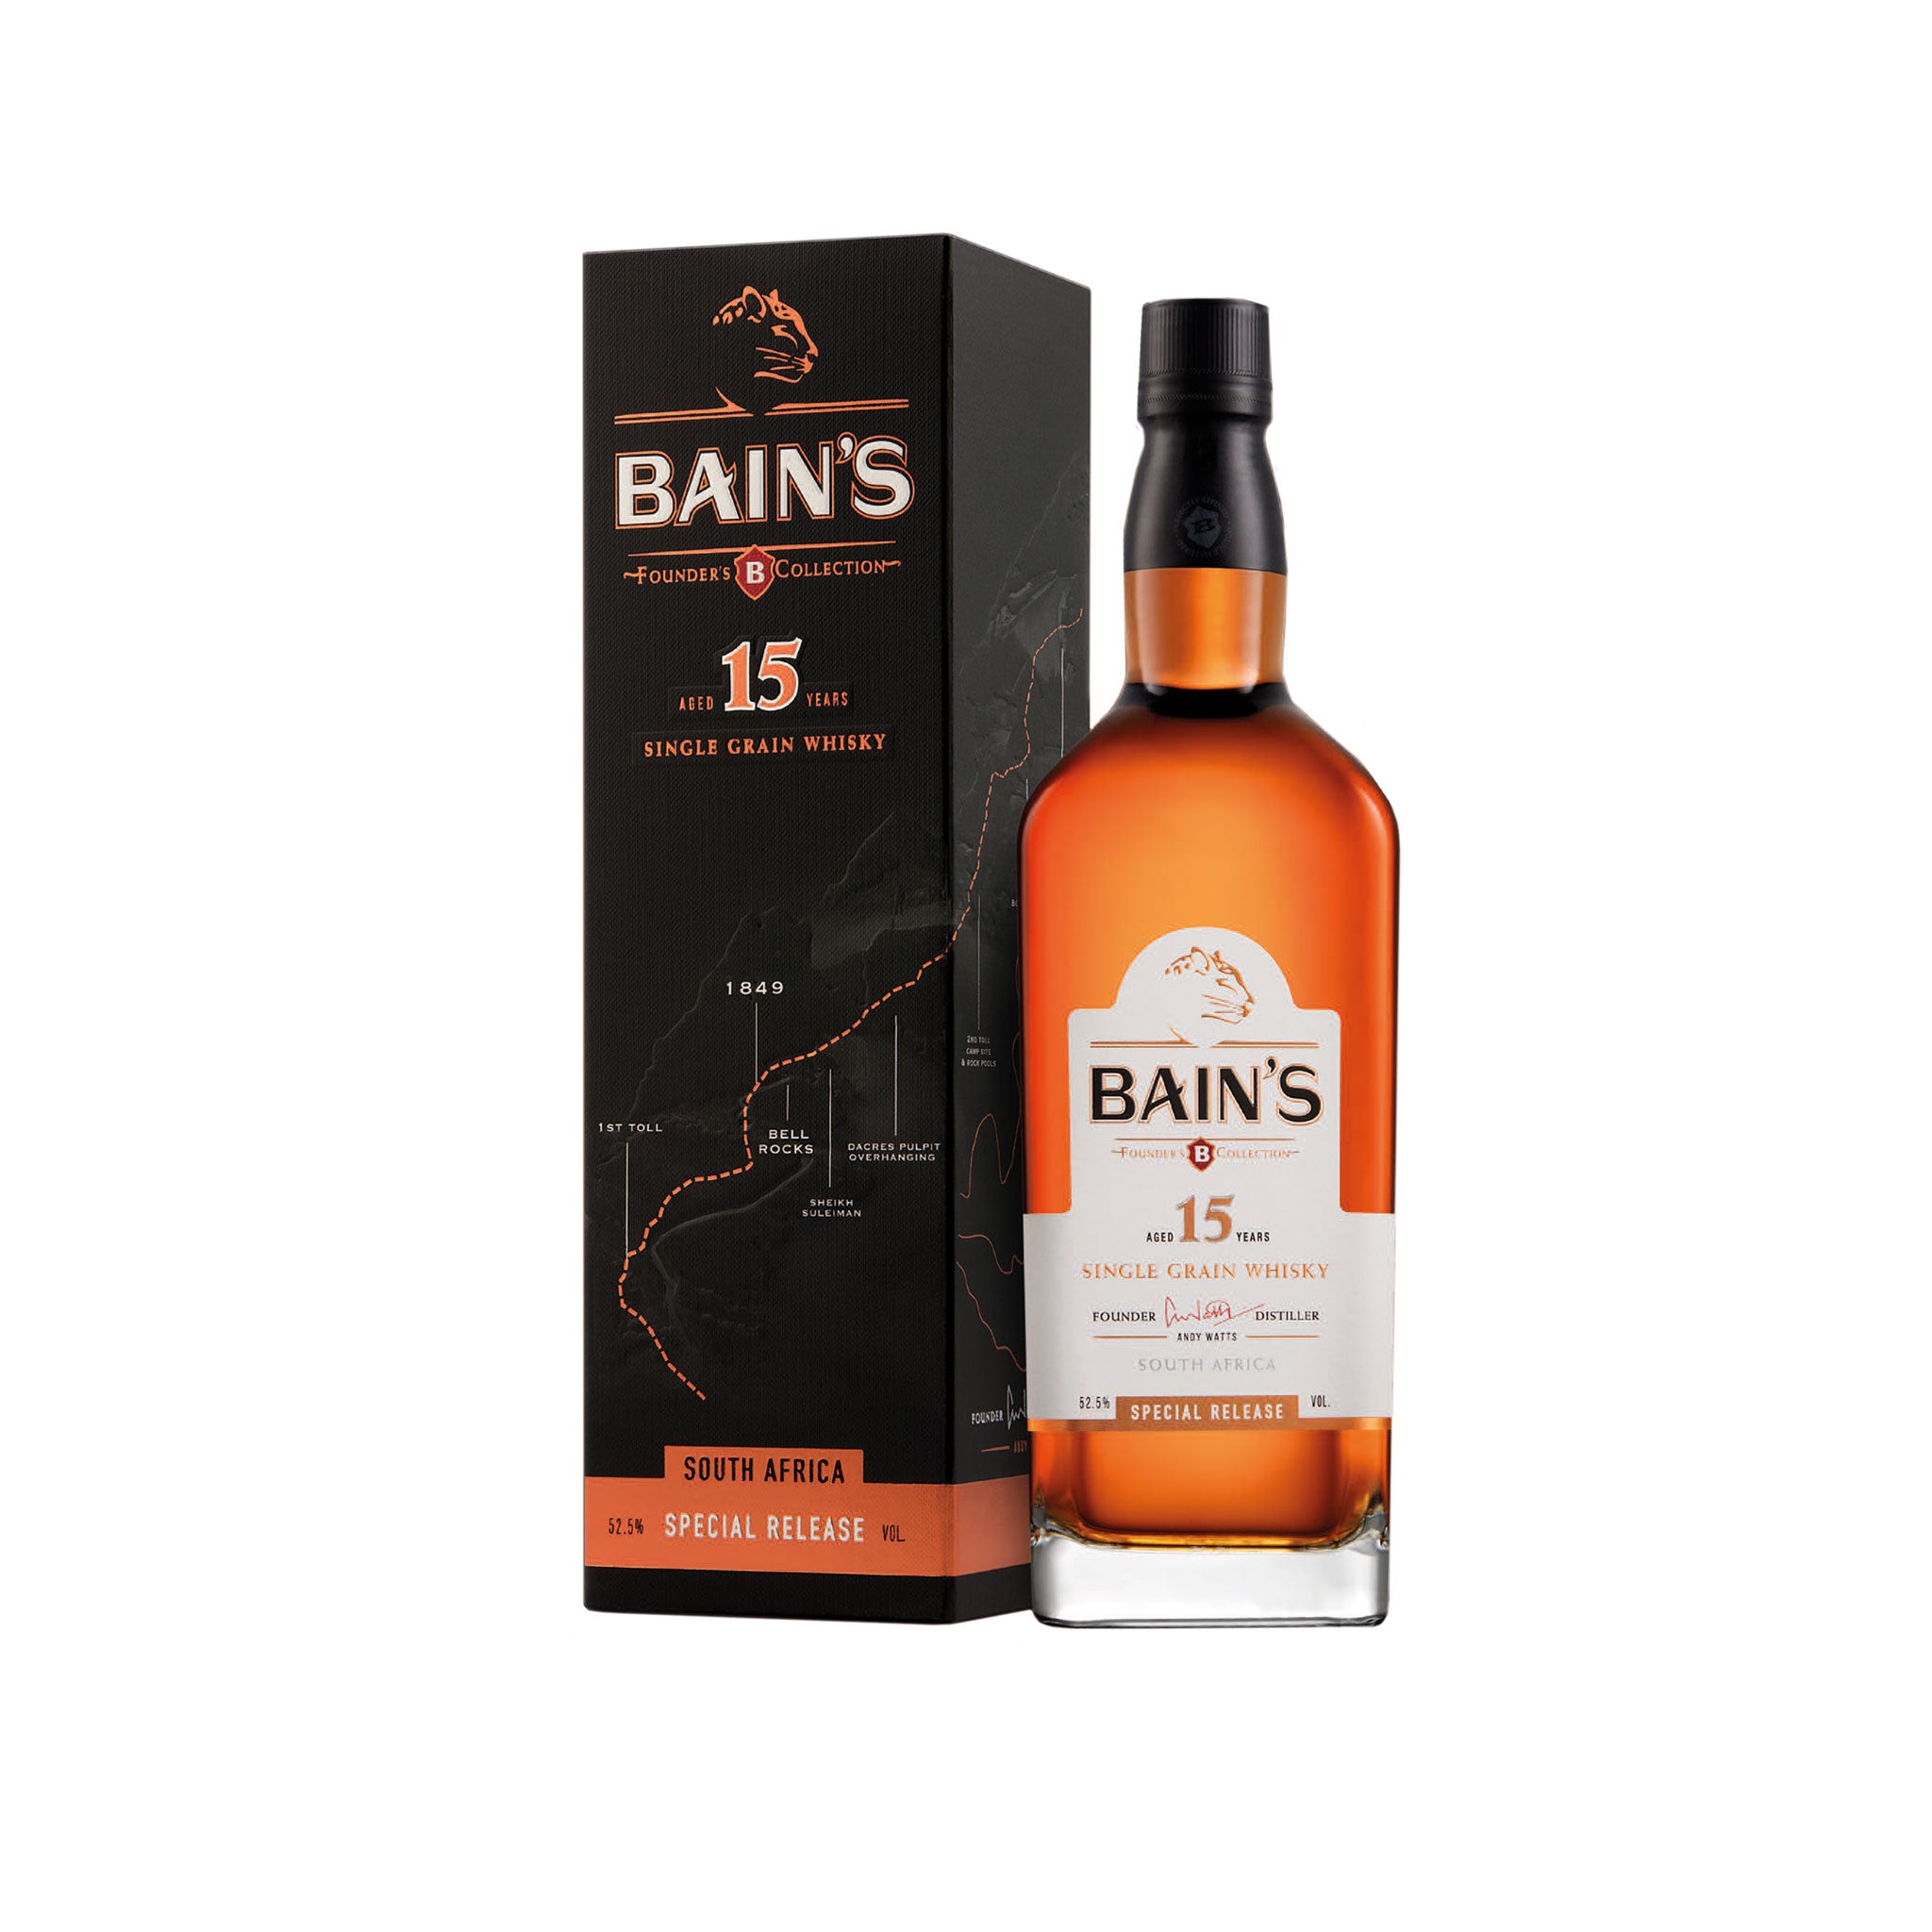 Bain's Cape Mountain Whisky Founders Collection 15 Year Old